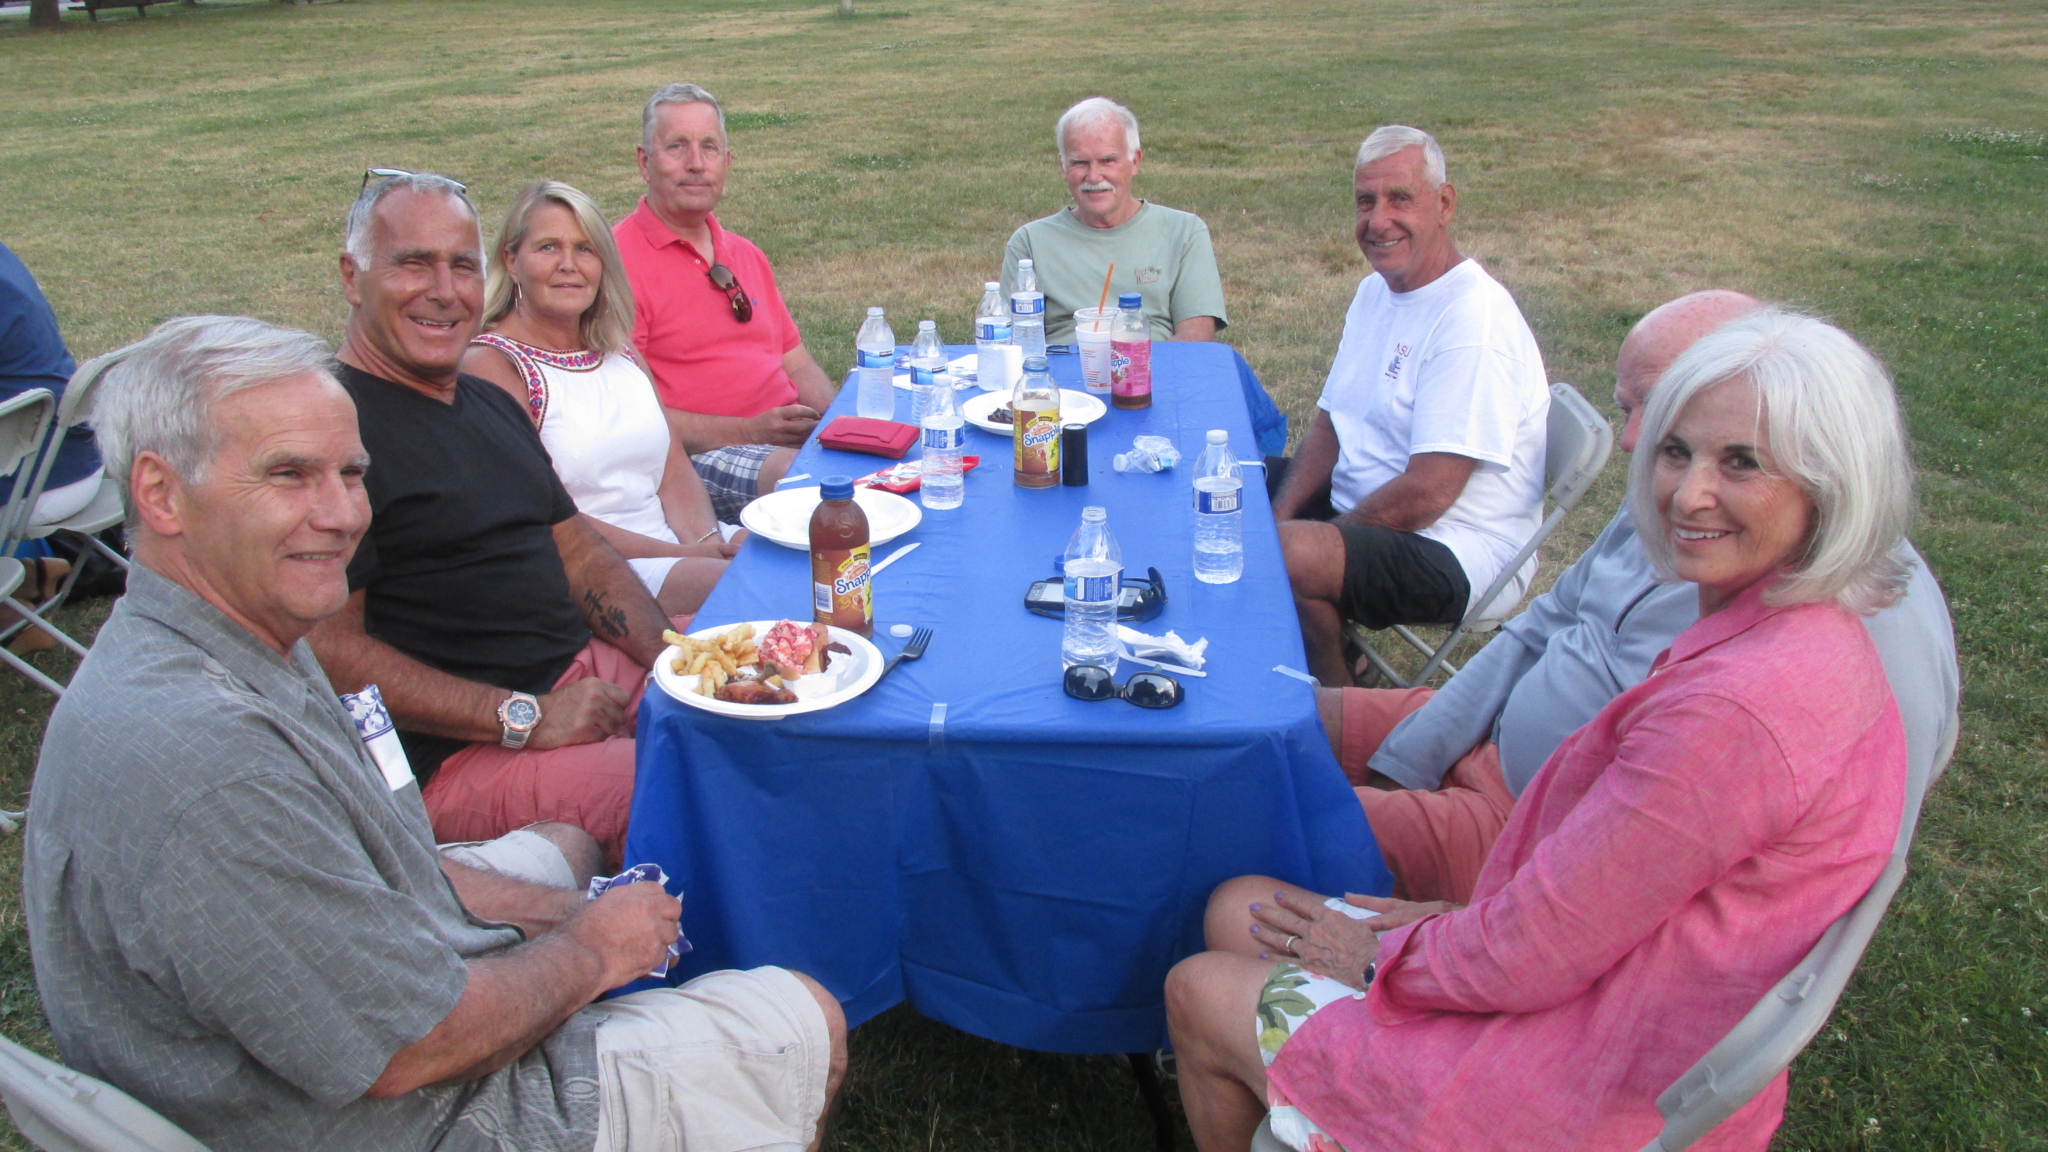 A table of revelers at Tom White’s “Open Hearts/Open Homes” cookout in Marine/Farragut Park.